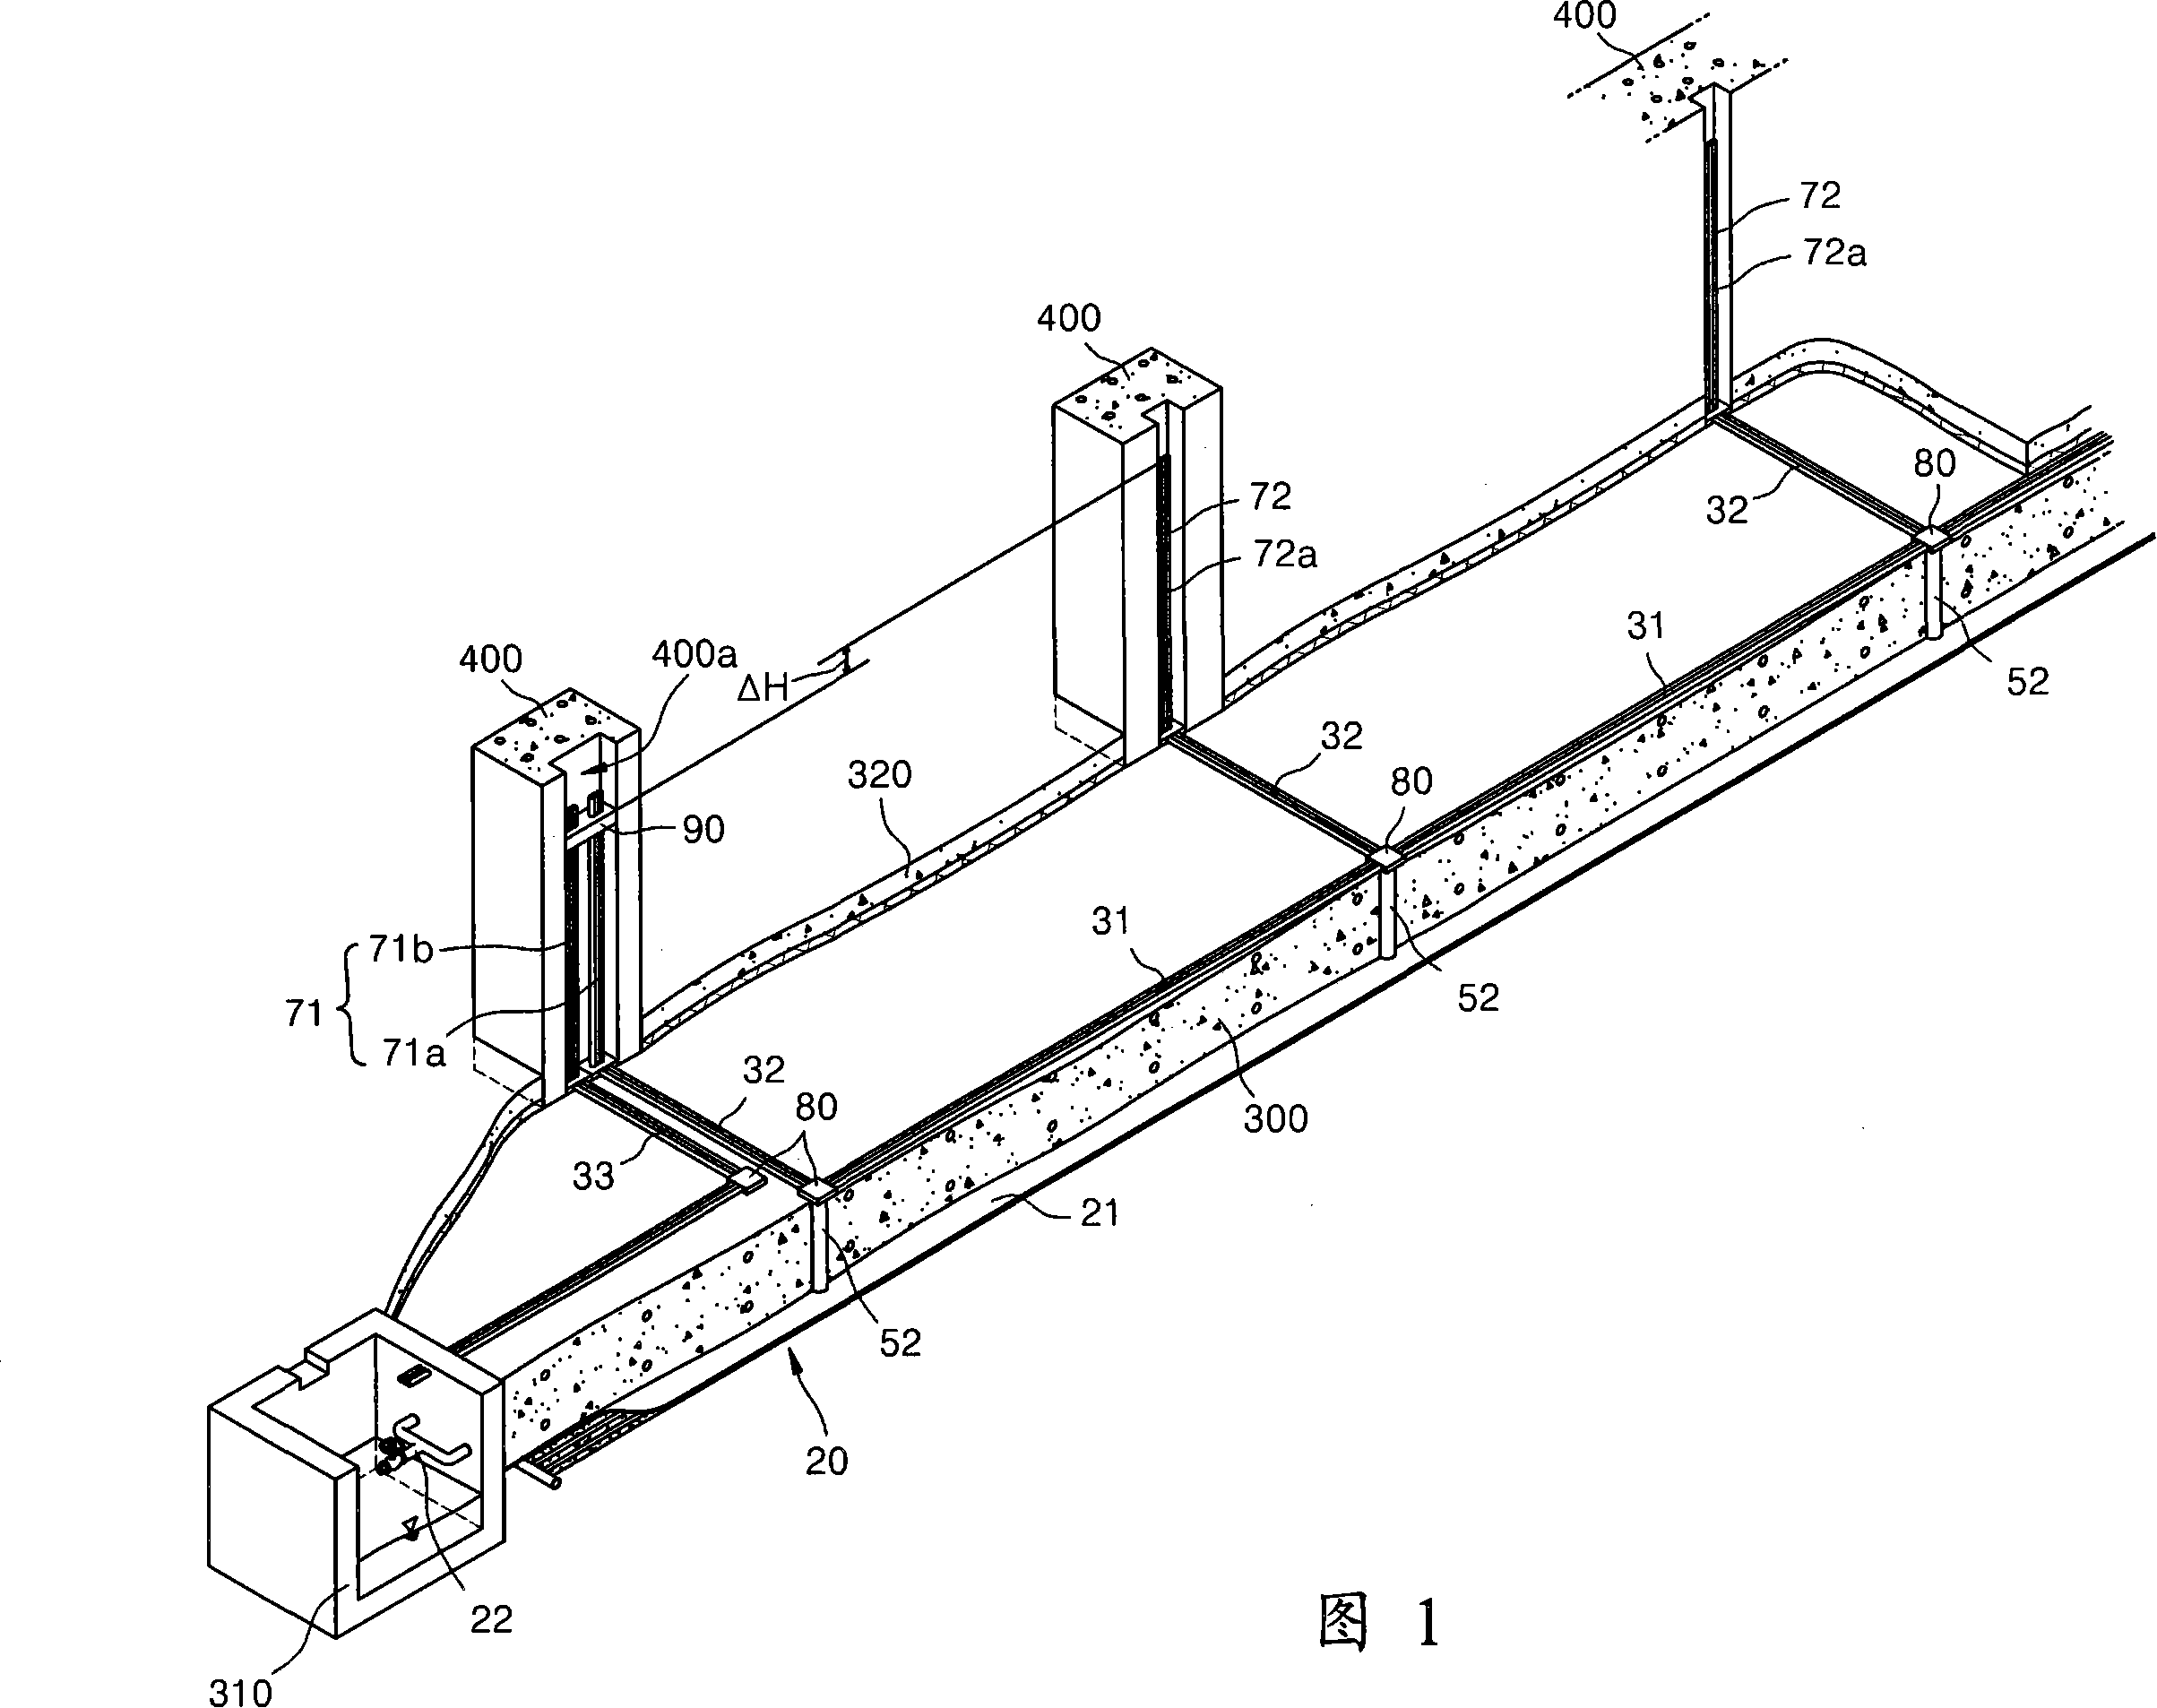 Apparatus for draining subsurface water